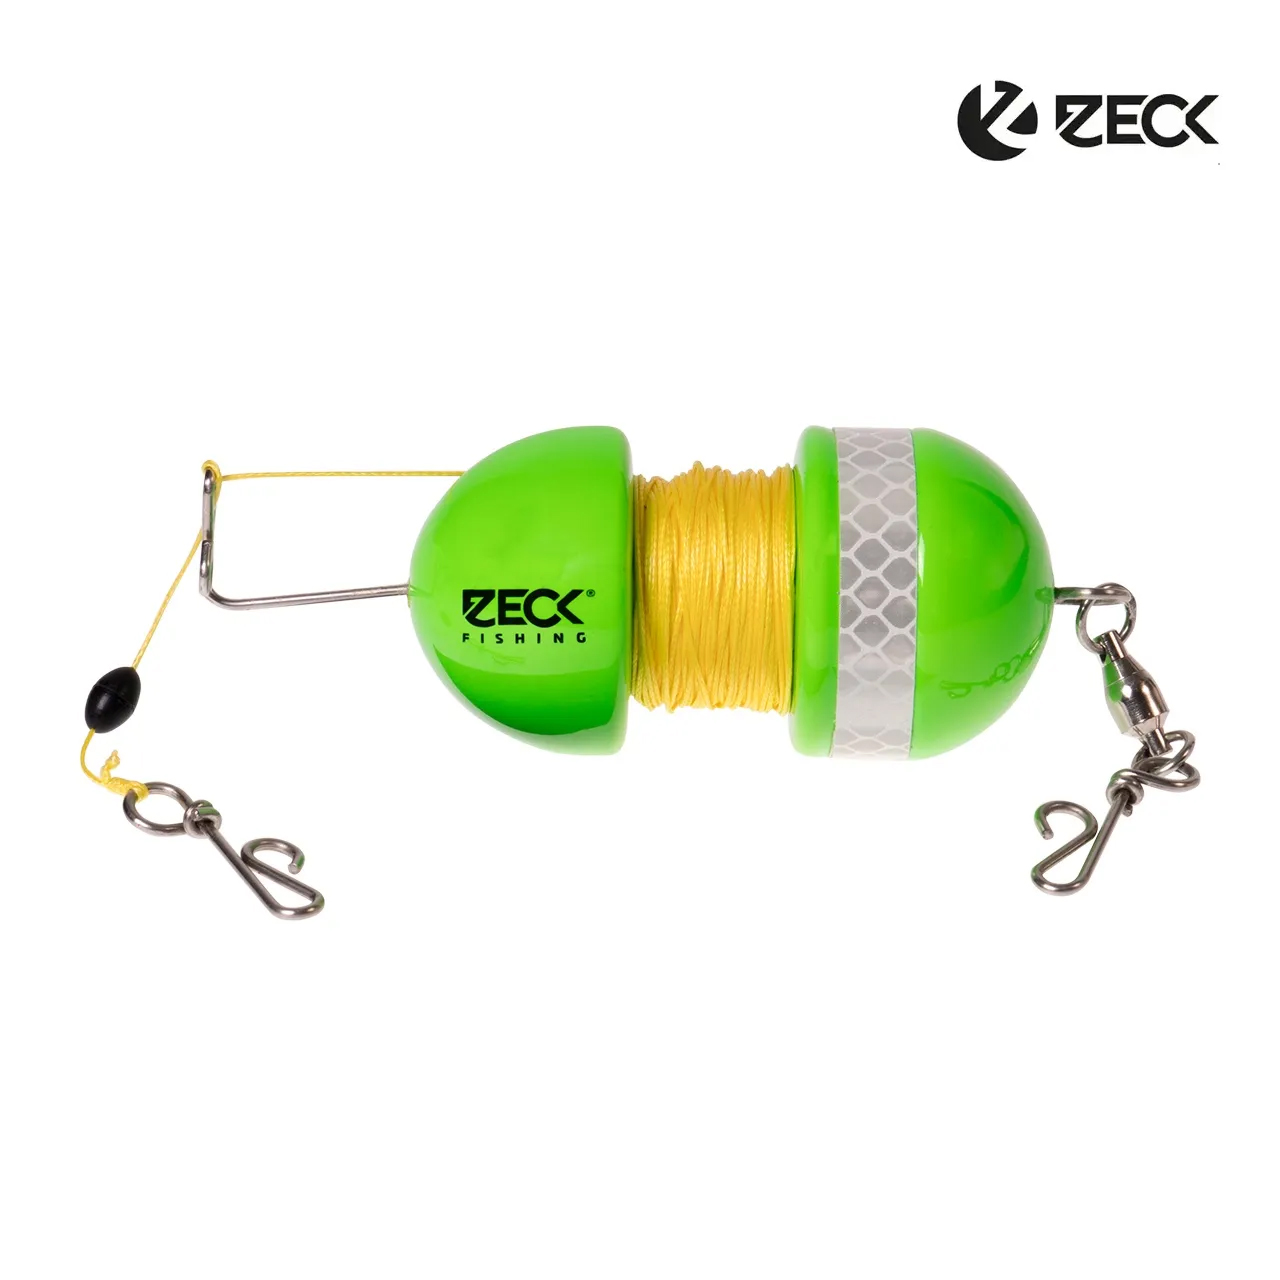 Zeck Fishing Outrigger System Green Version